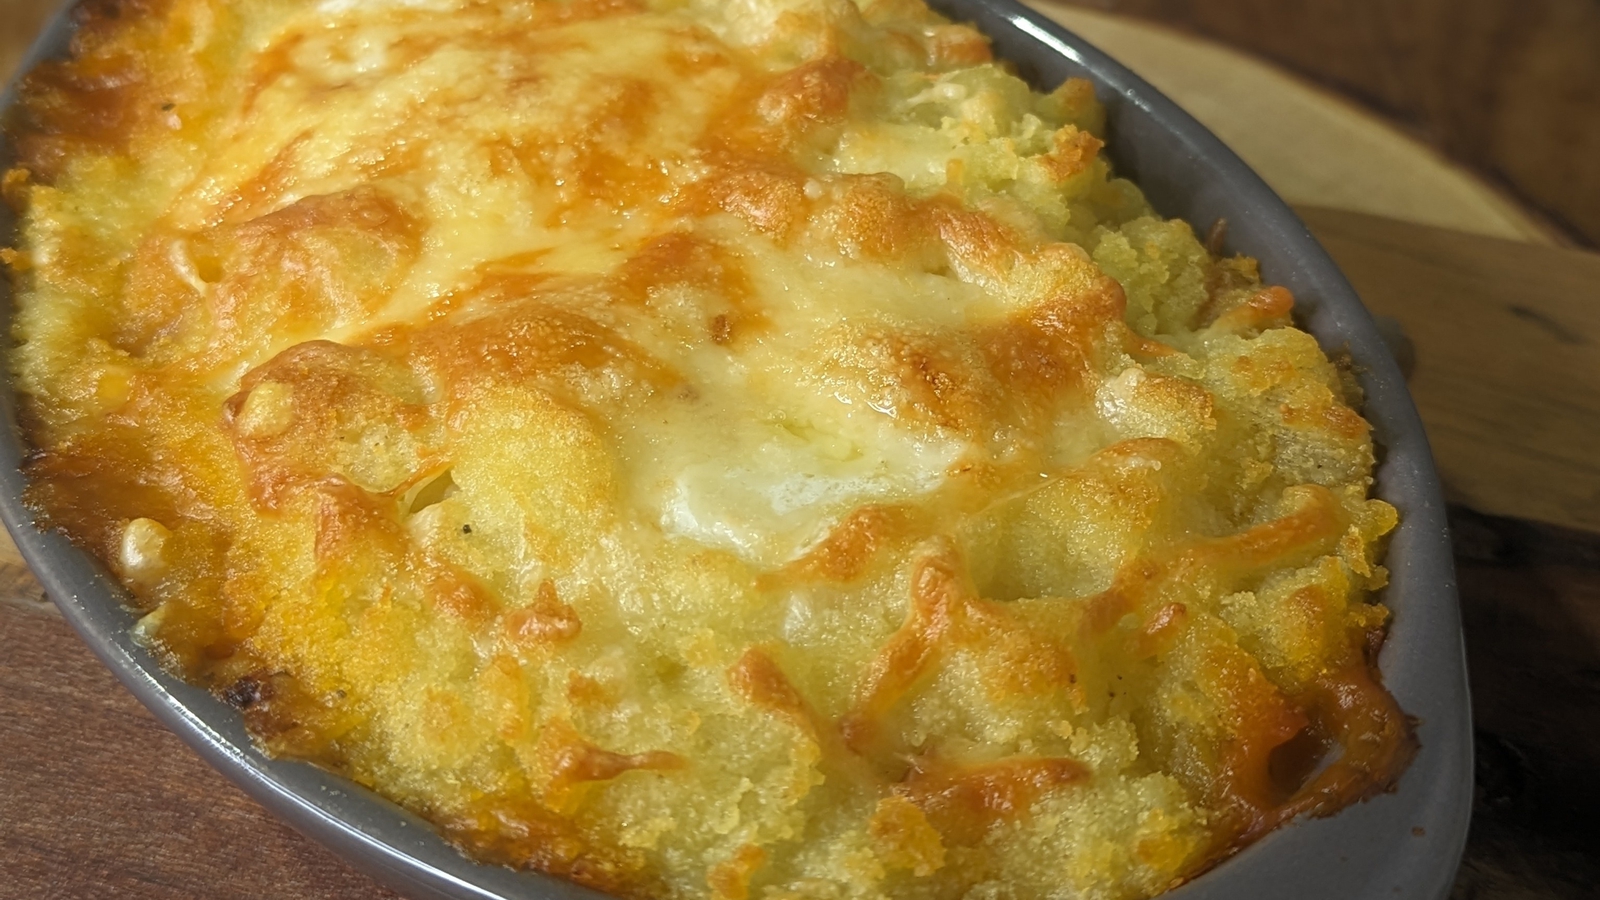 Kevin Dundon's beef cottage pie: Today